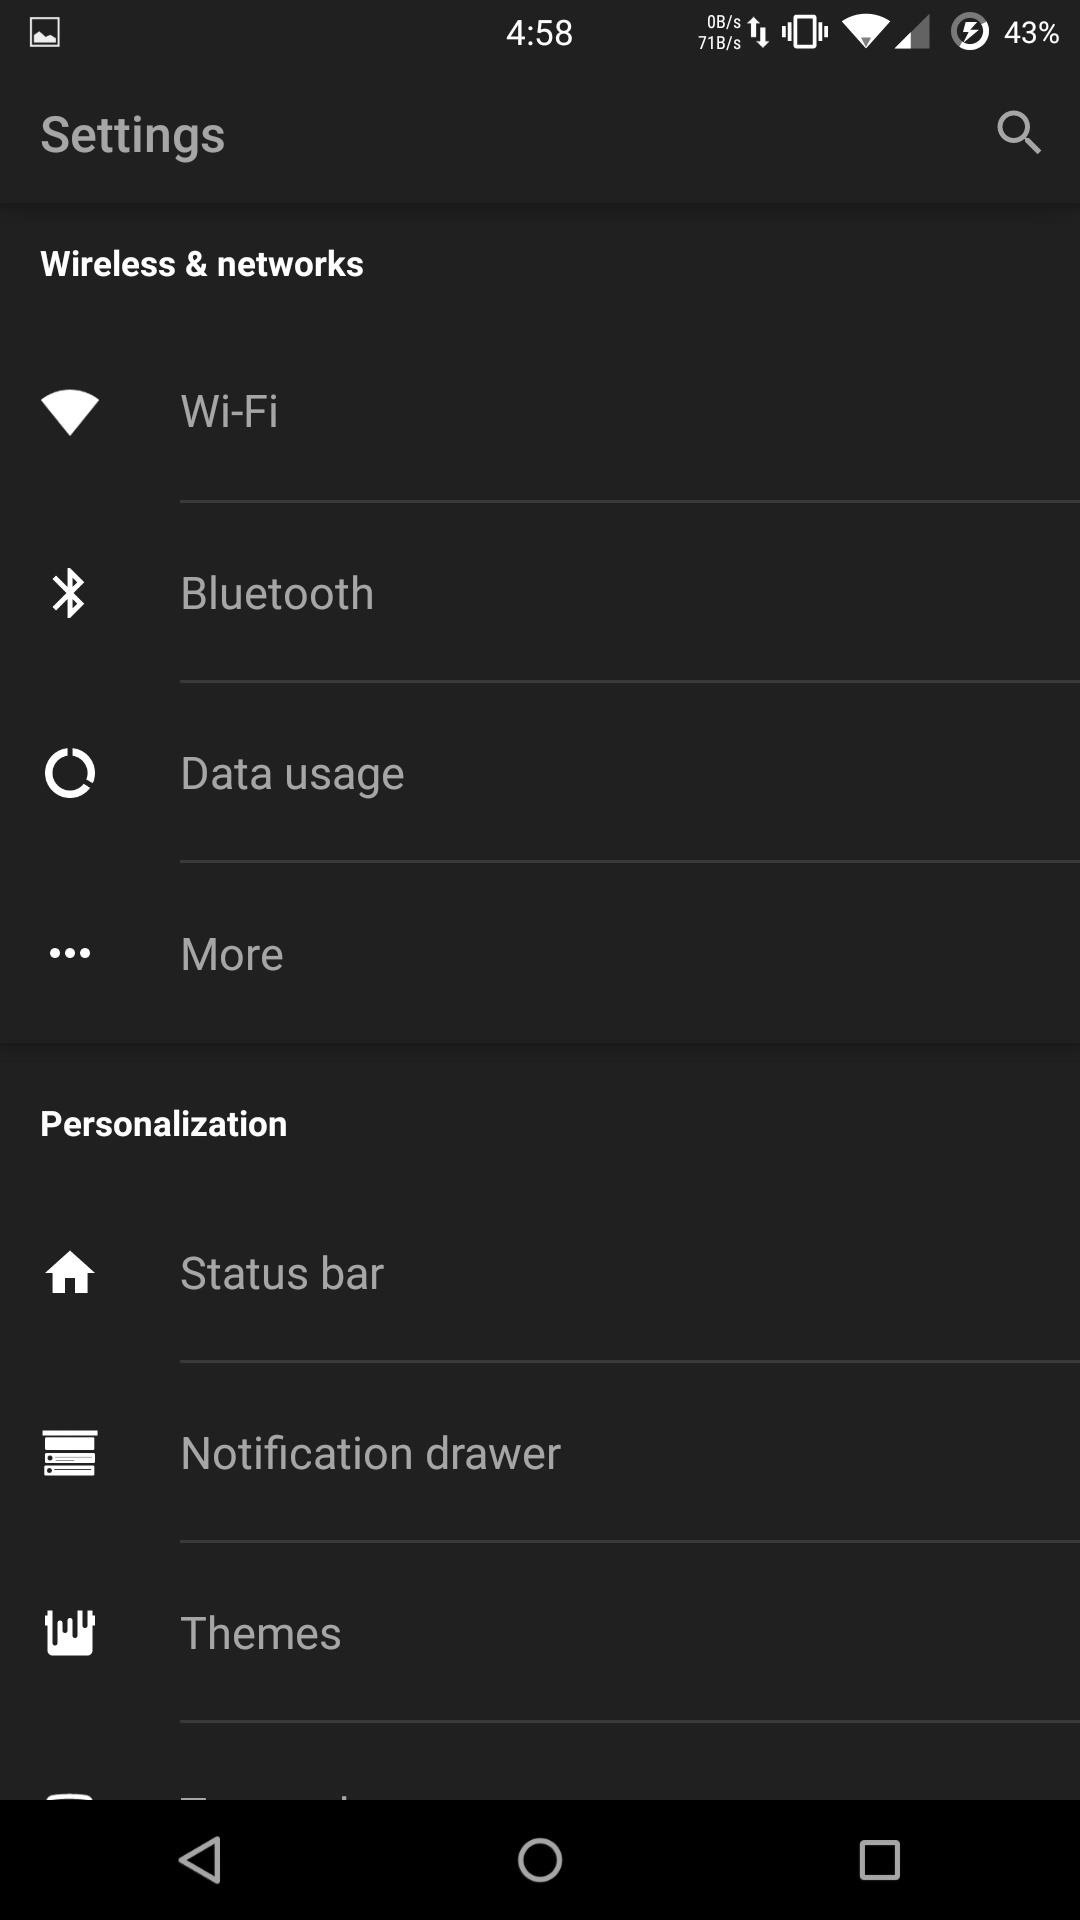 Get Early Access to CyanogenMod 12's Theme Engine on Your OnePlus One